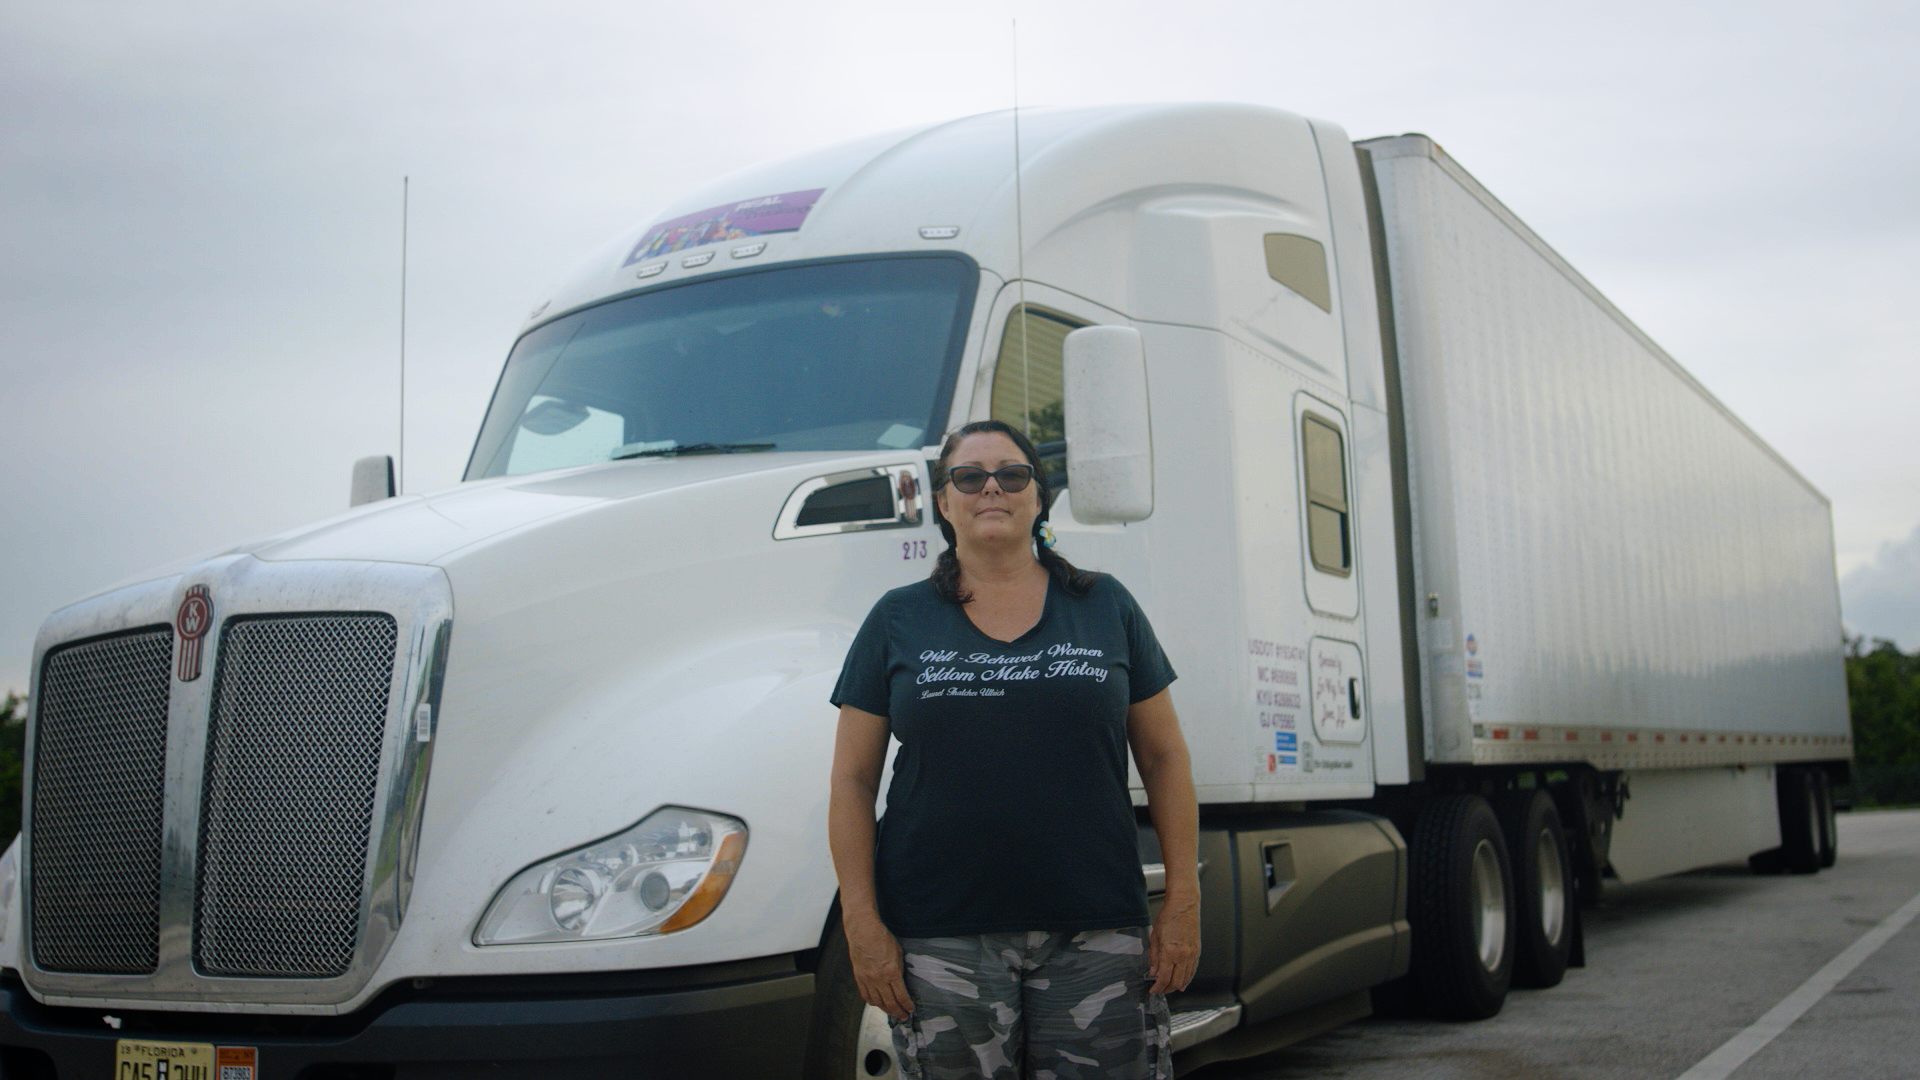 How Much Does a Female Truck Driver Make?